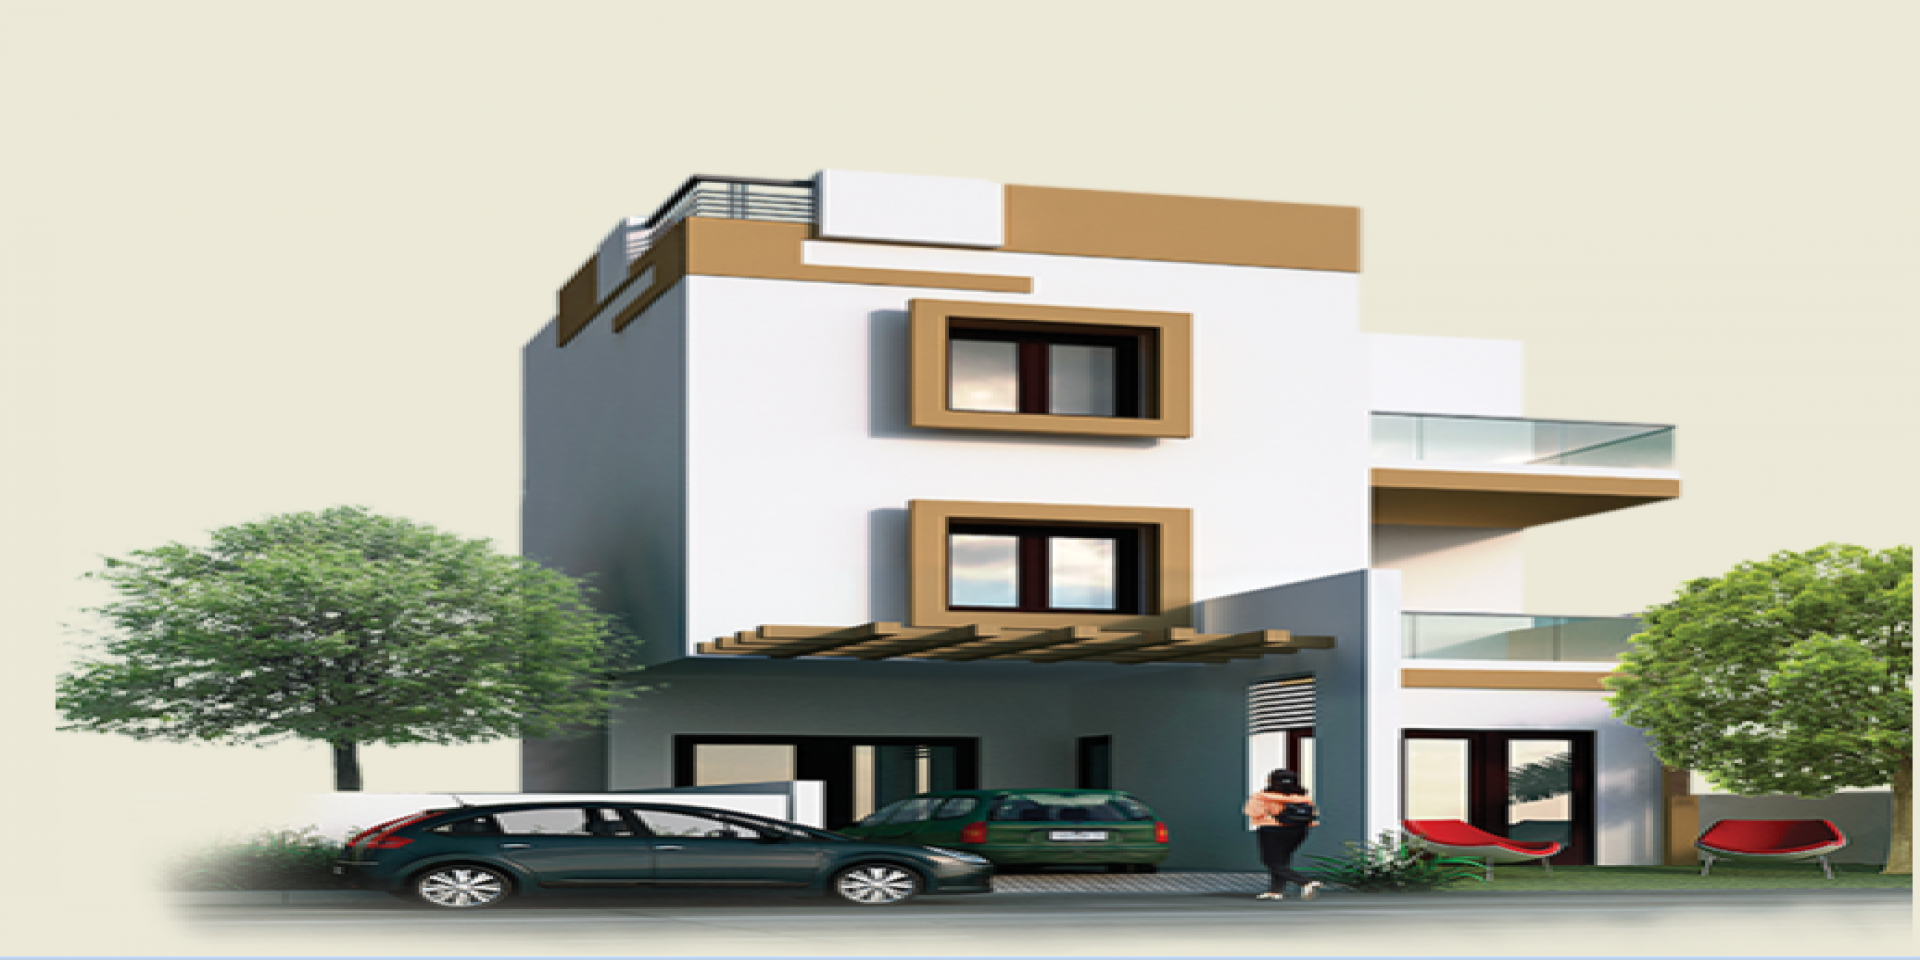 2, 3, 4 BHK House for sale in Navalur